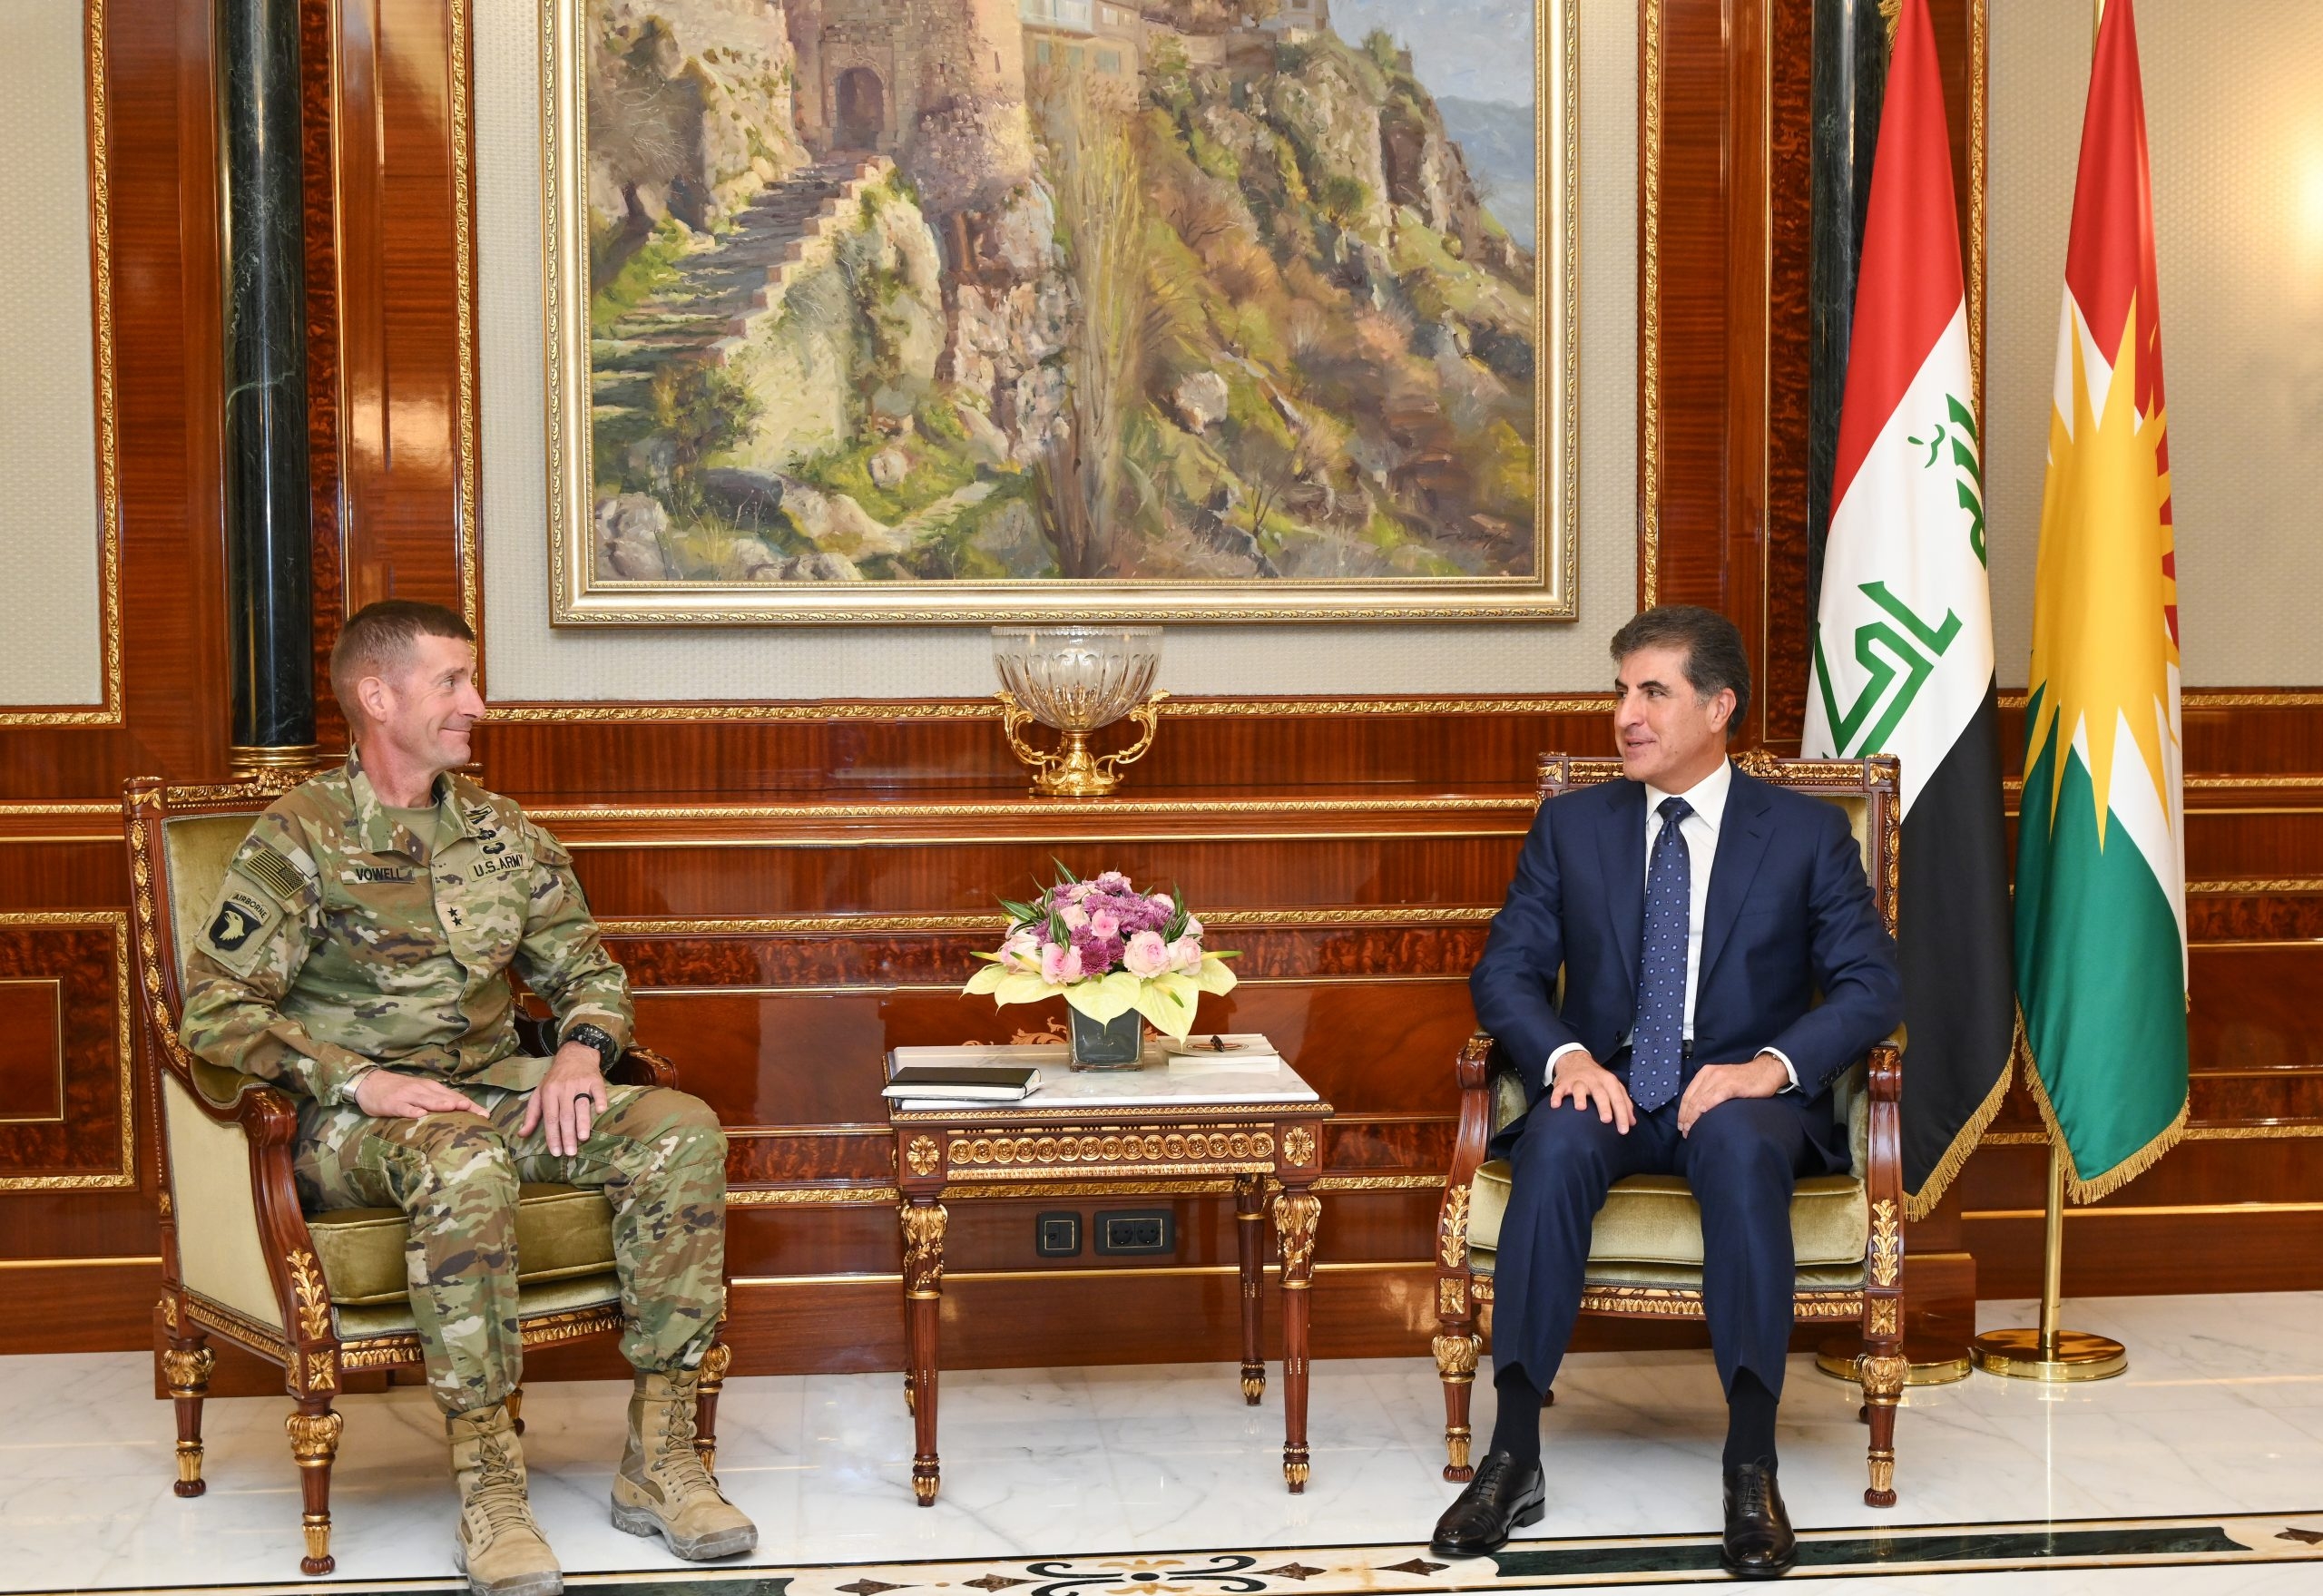 Nechirvan Barzani, the President, engages in discussions with the leader of the coalition forces operating in Iraq and Syria.